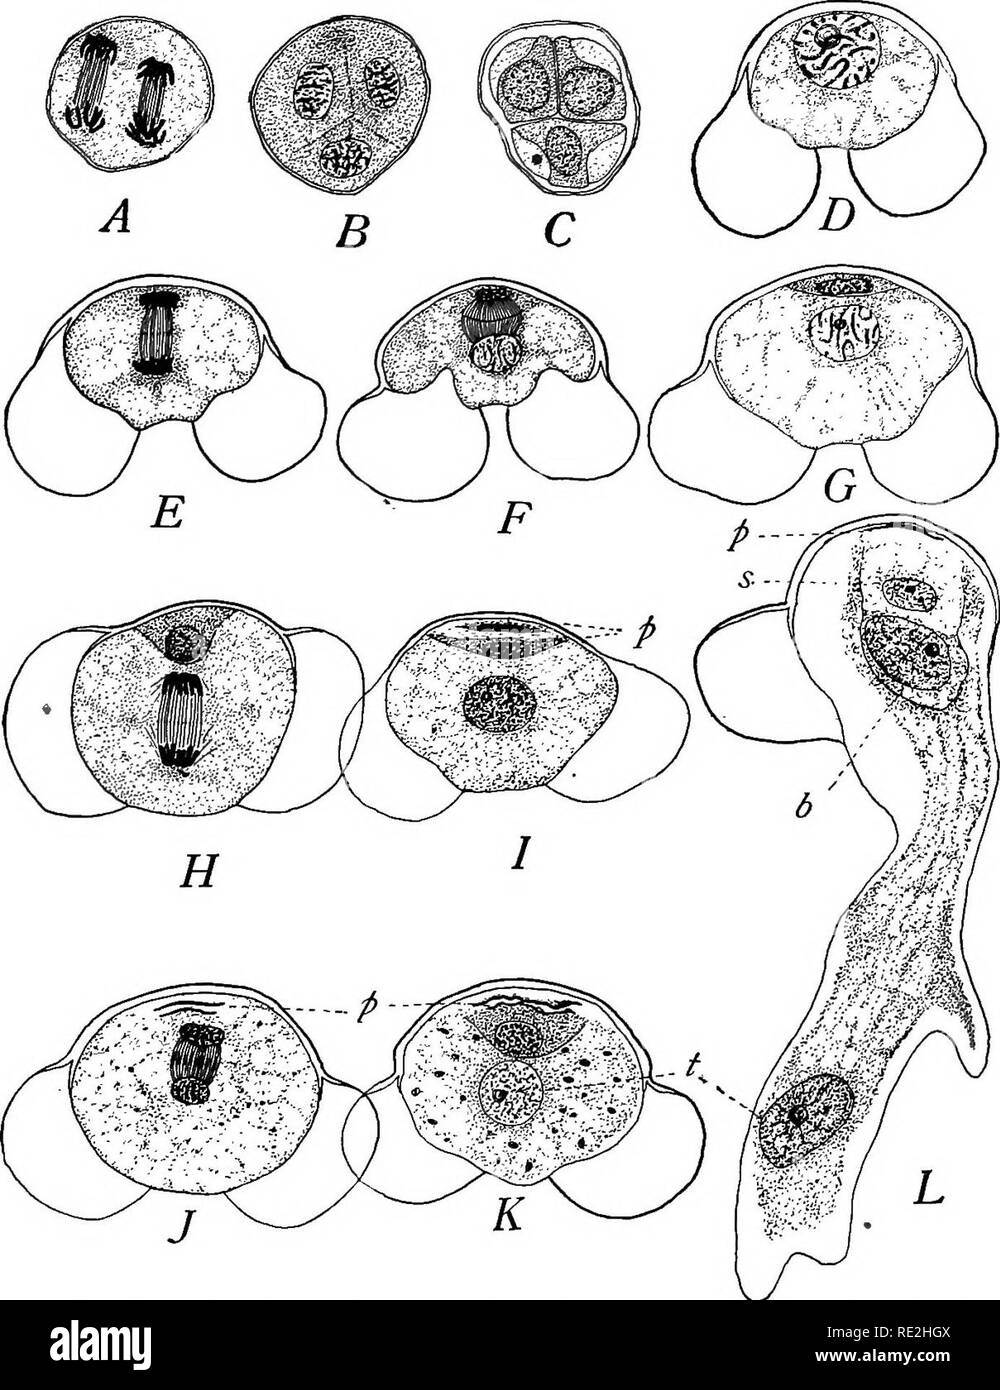 Morphology Of Spermatophytes Part I Gymnosperms Gymnosperms Plant Morphology Coniperales 91 The Third Division Immediately Follows Fig 69 J Divid Ing The Large Antheridial Cell Into The Primary Spermatogenons Fio 69 Pinus